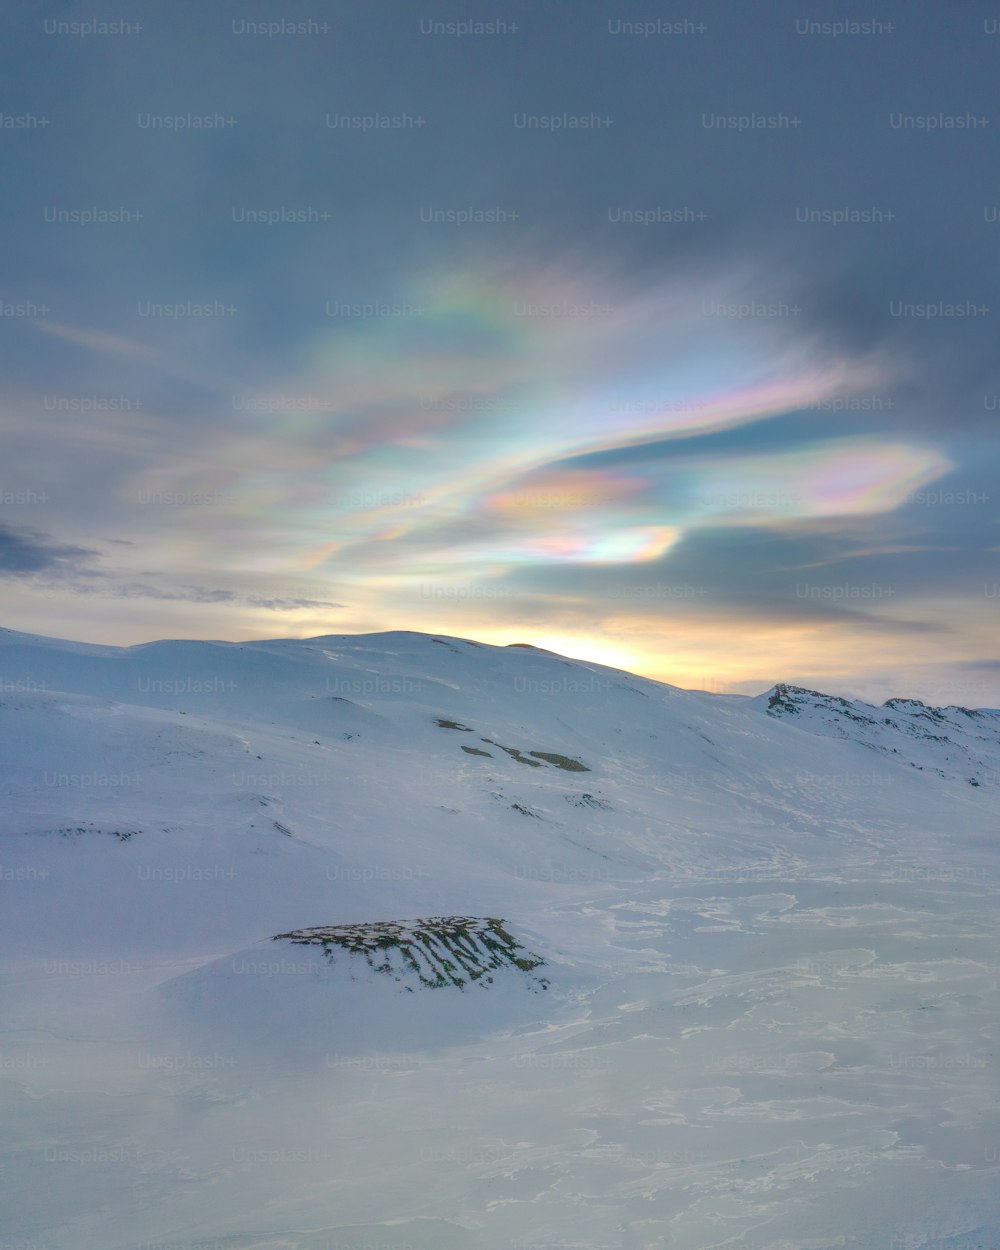 a rainbow in the sky over a snow covered mountain